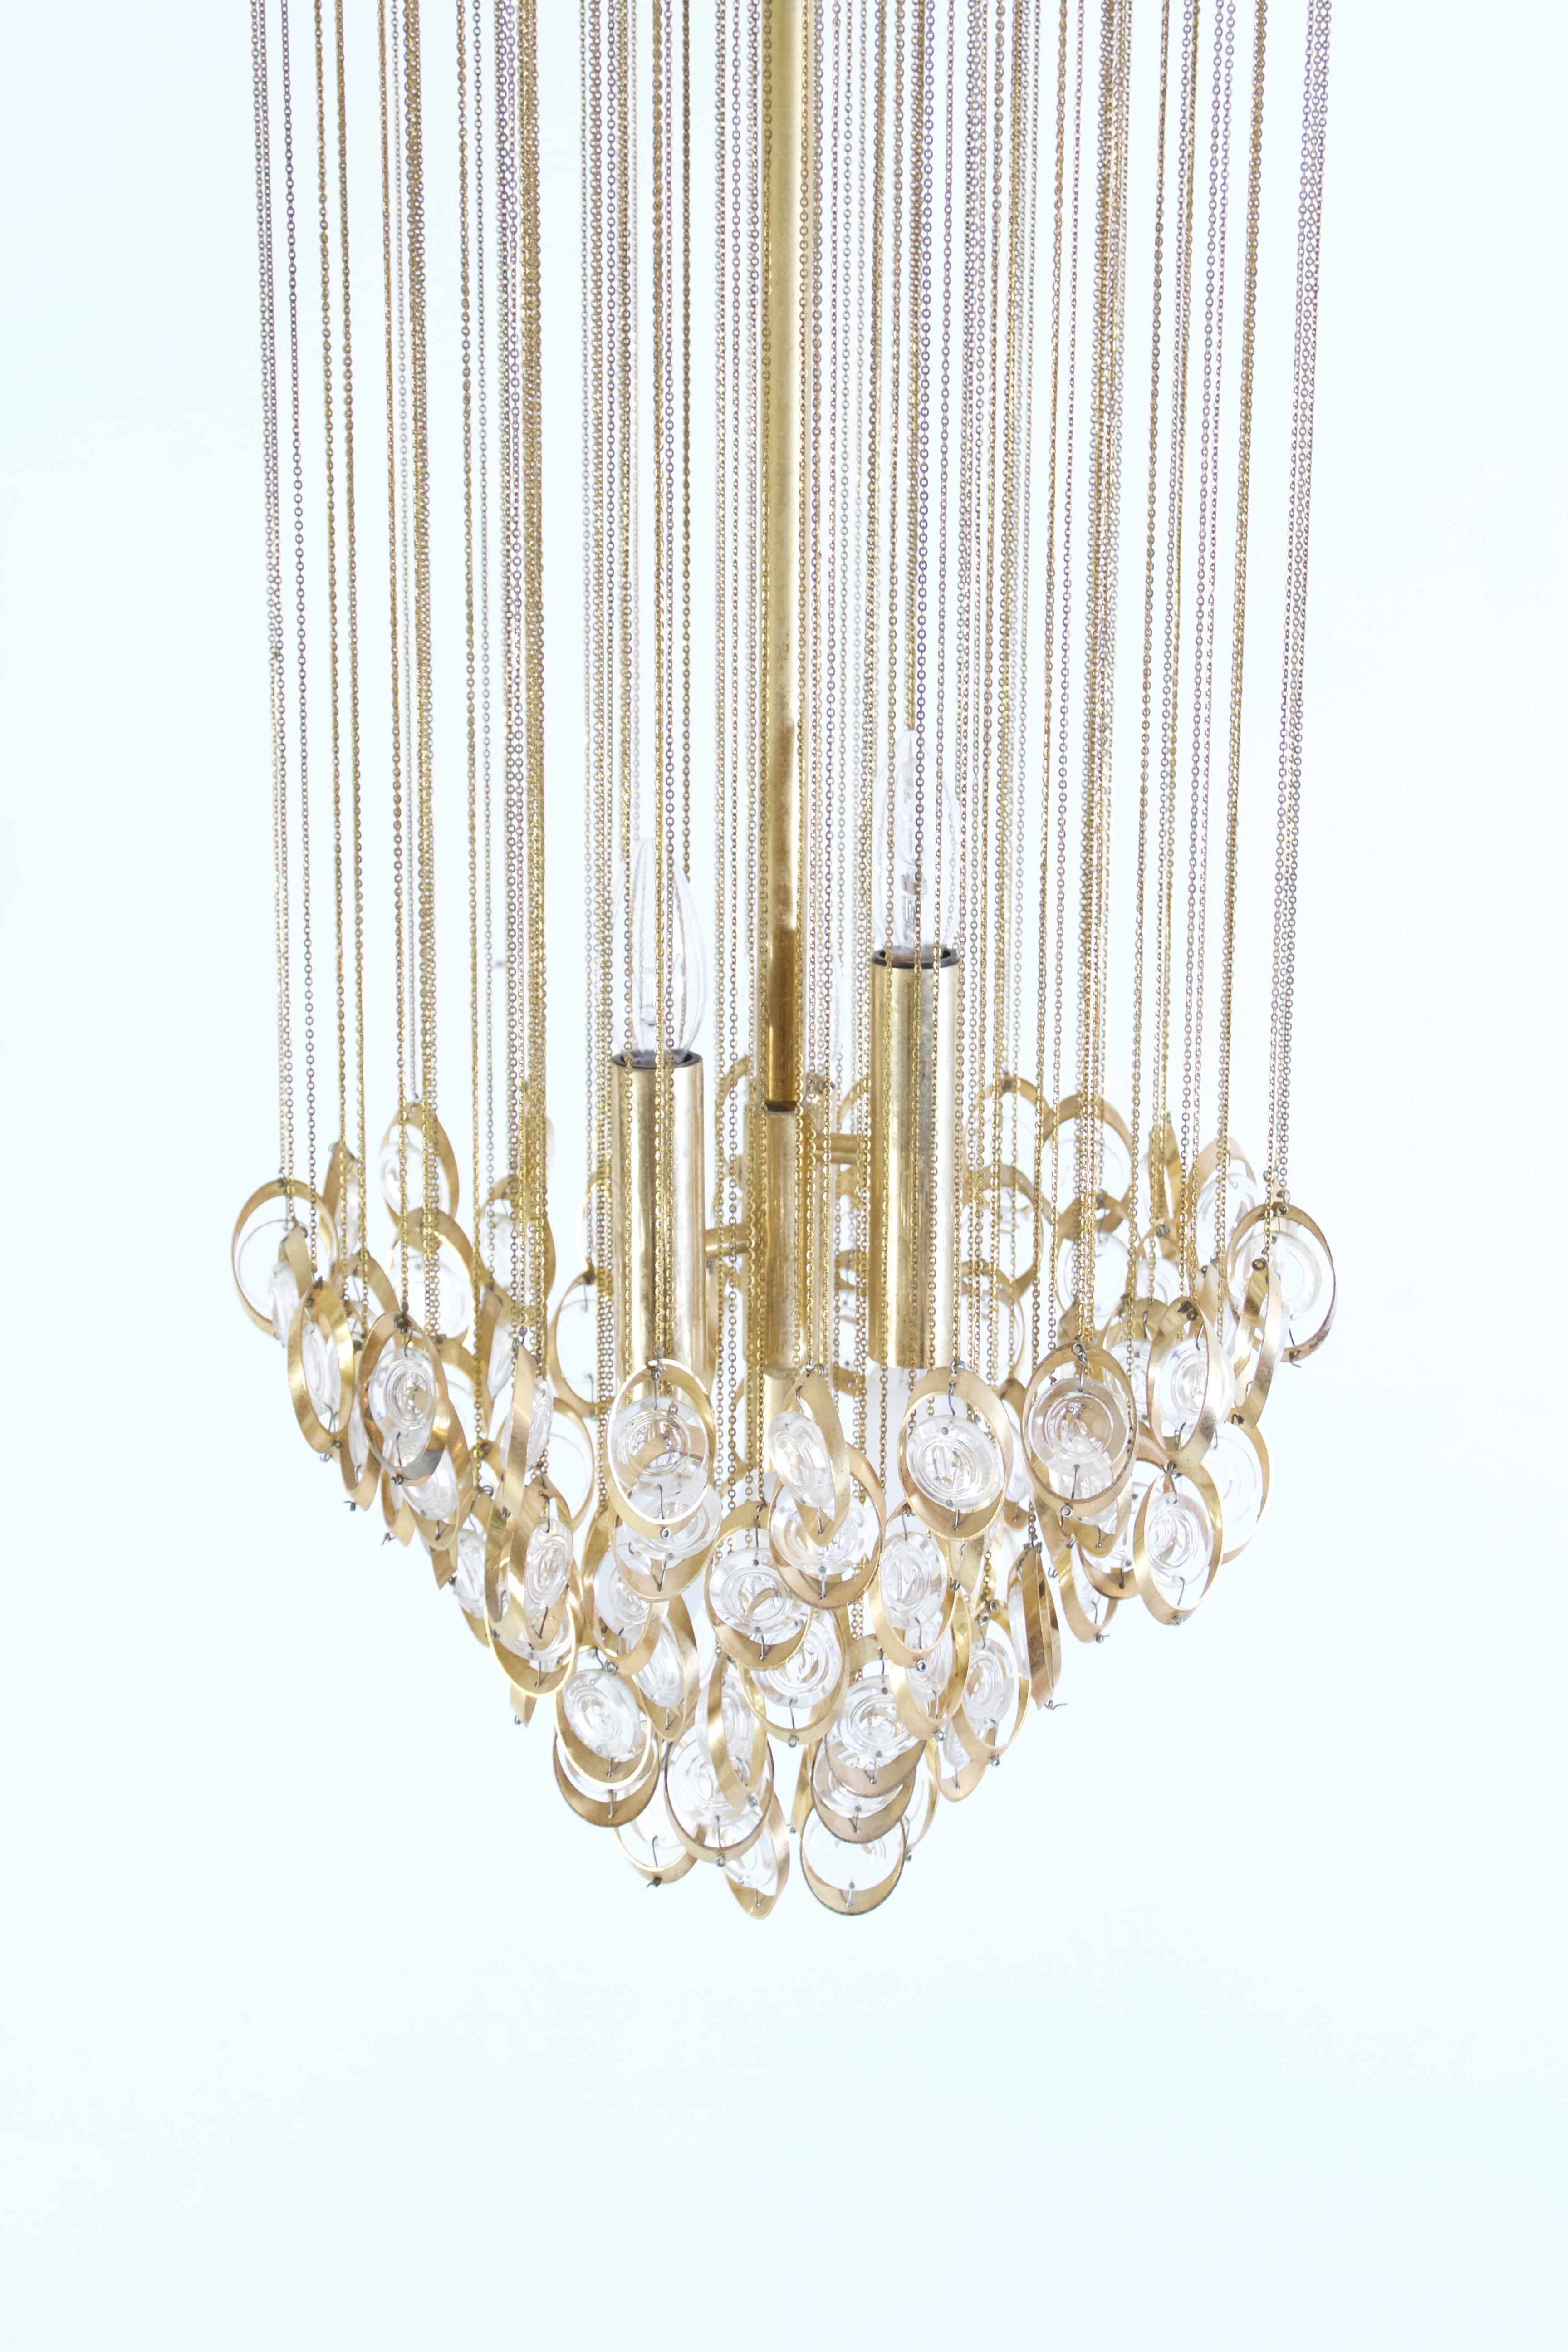 Large 1960s Italian Cascading Glass Chandelier For Sale 1